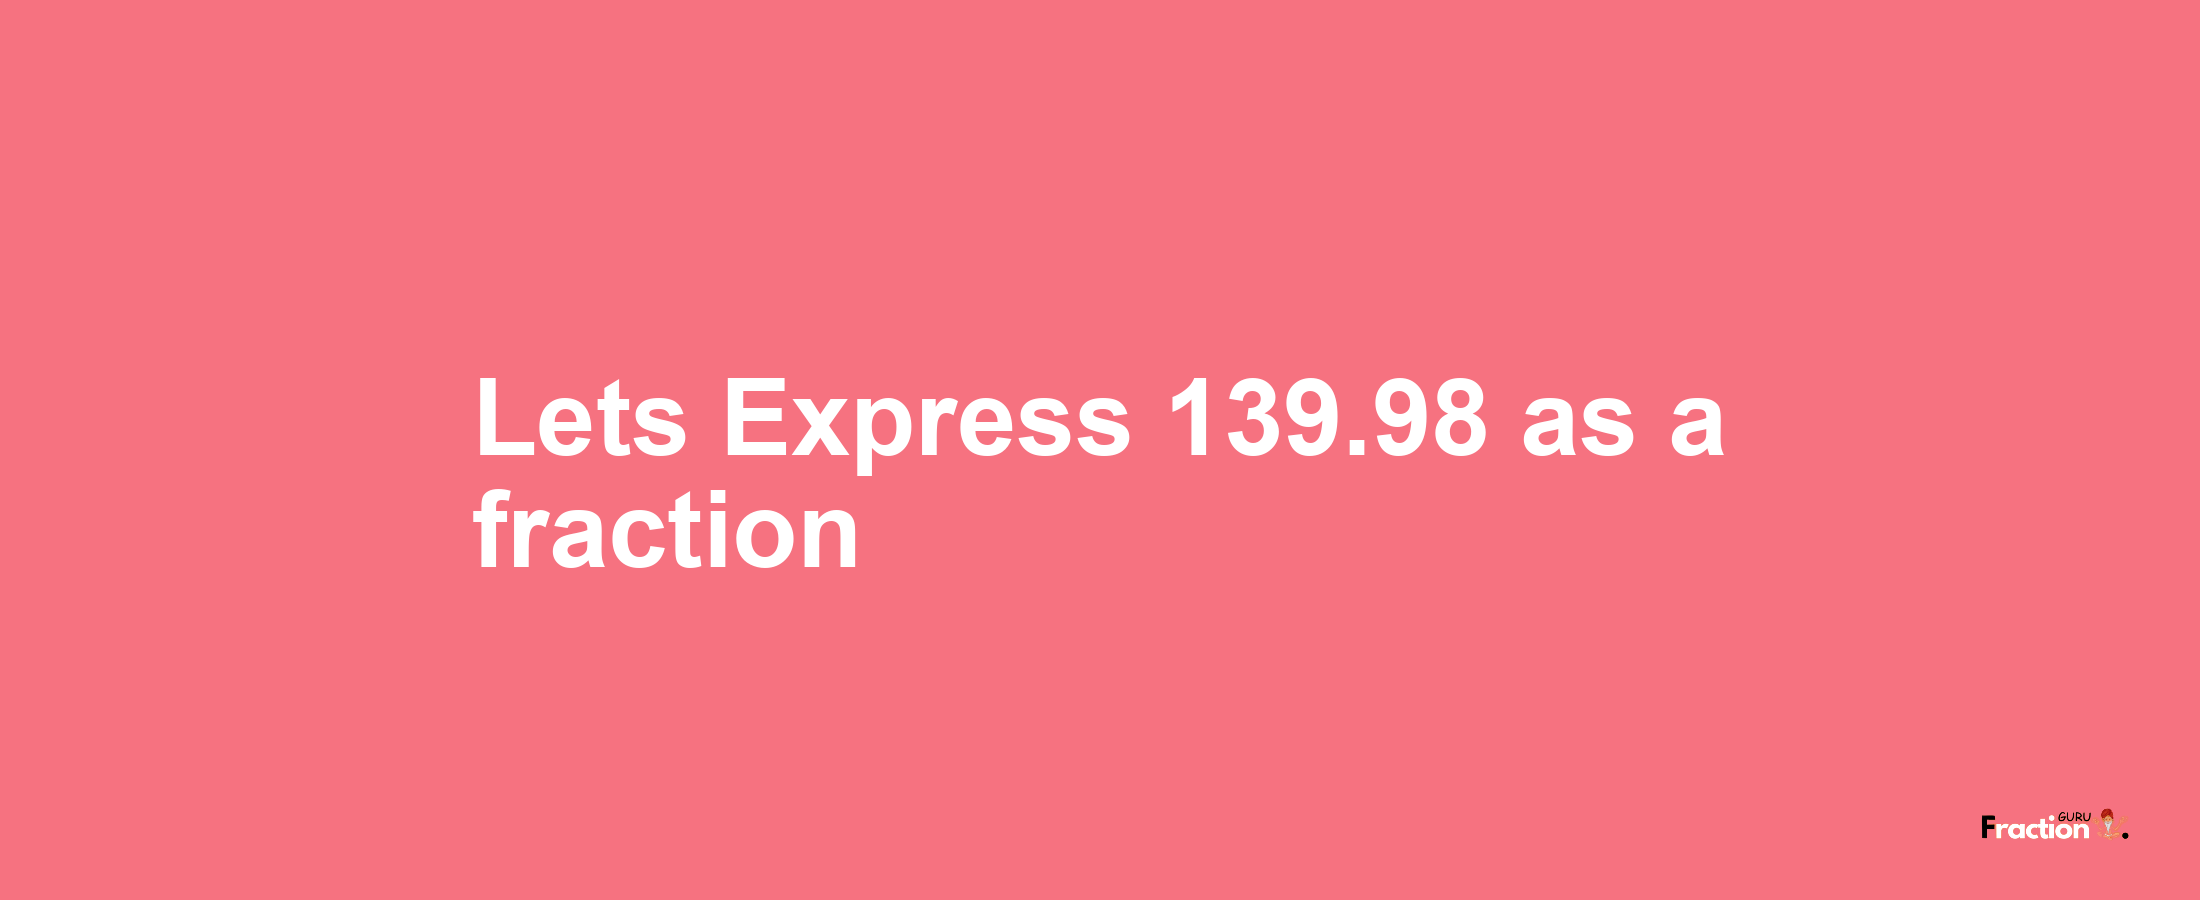 Lets Express 139.98 as afraction